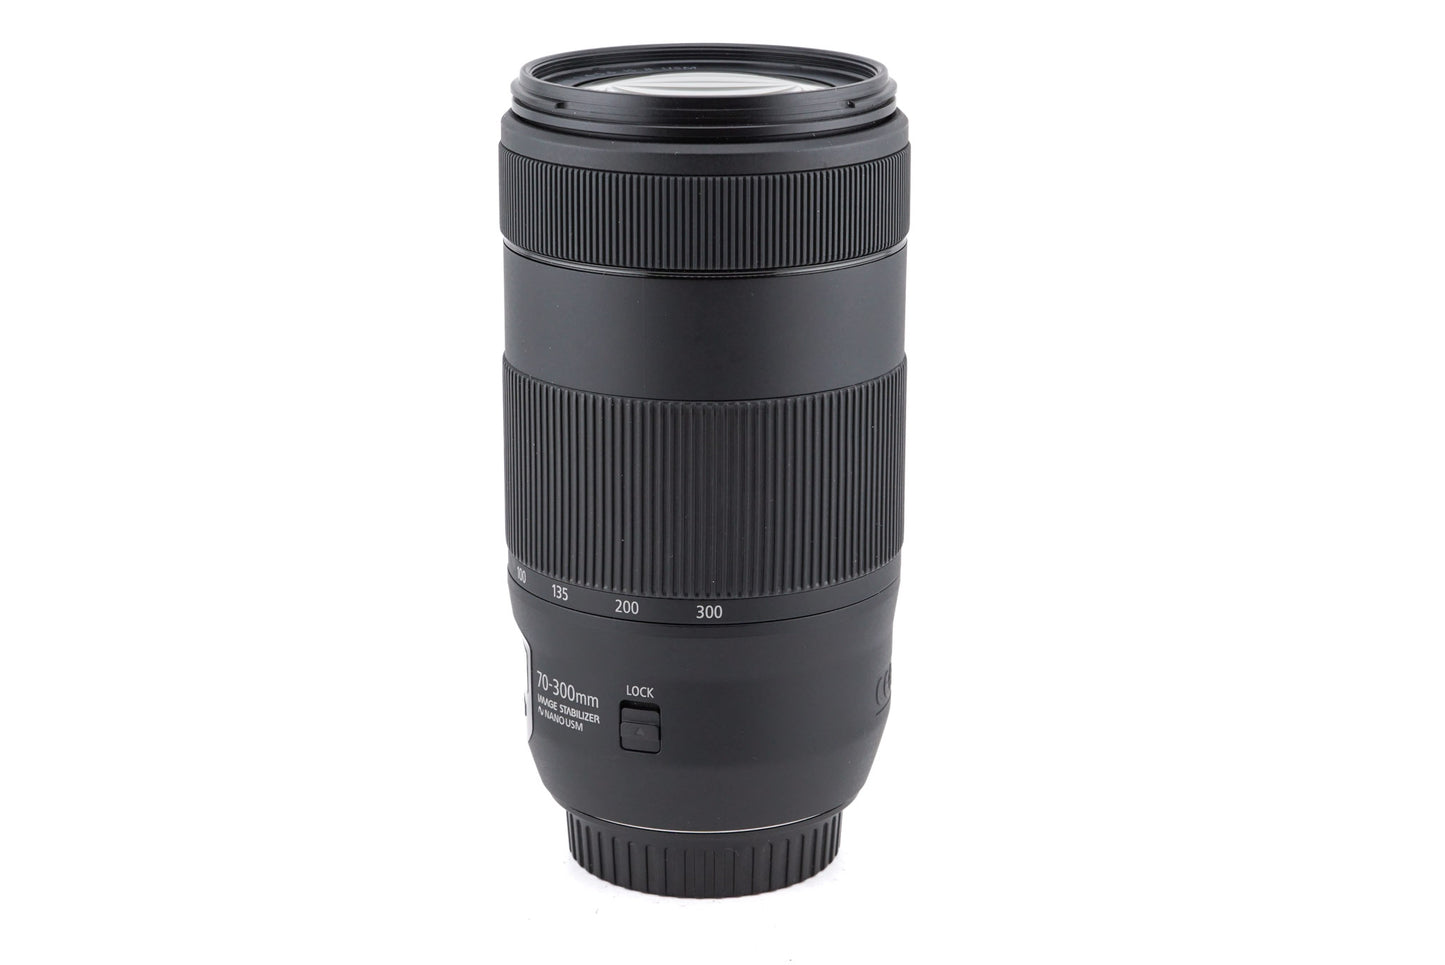 Canon 70-300mm f4-5.6 IS II USM